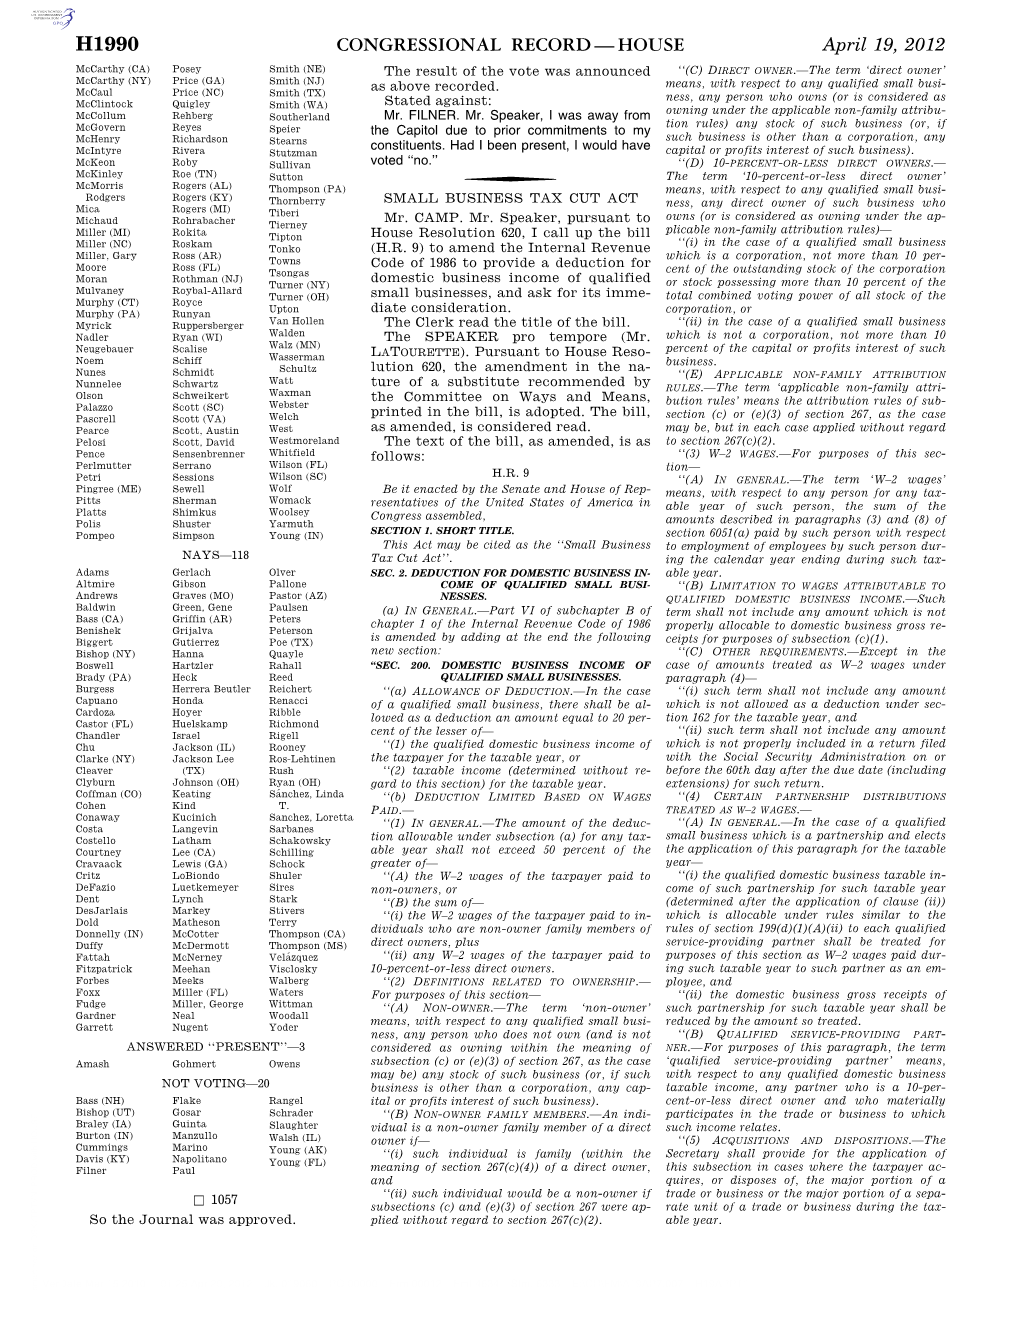 Congressional Record—House H1990